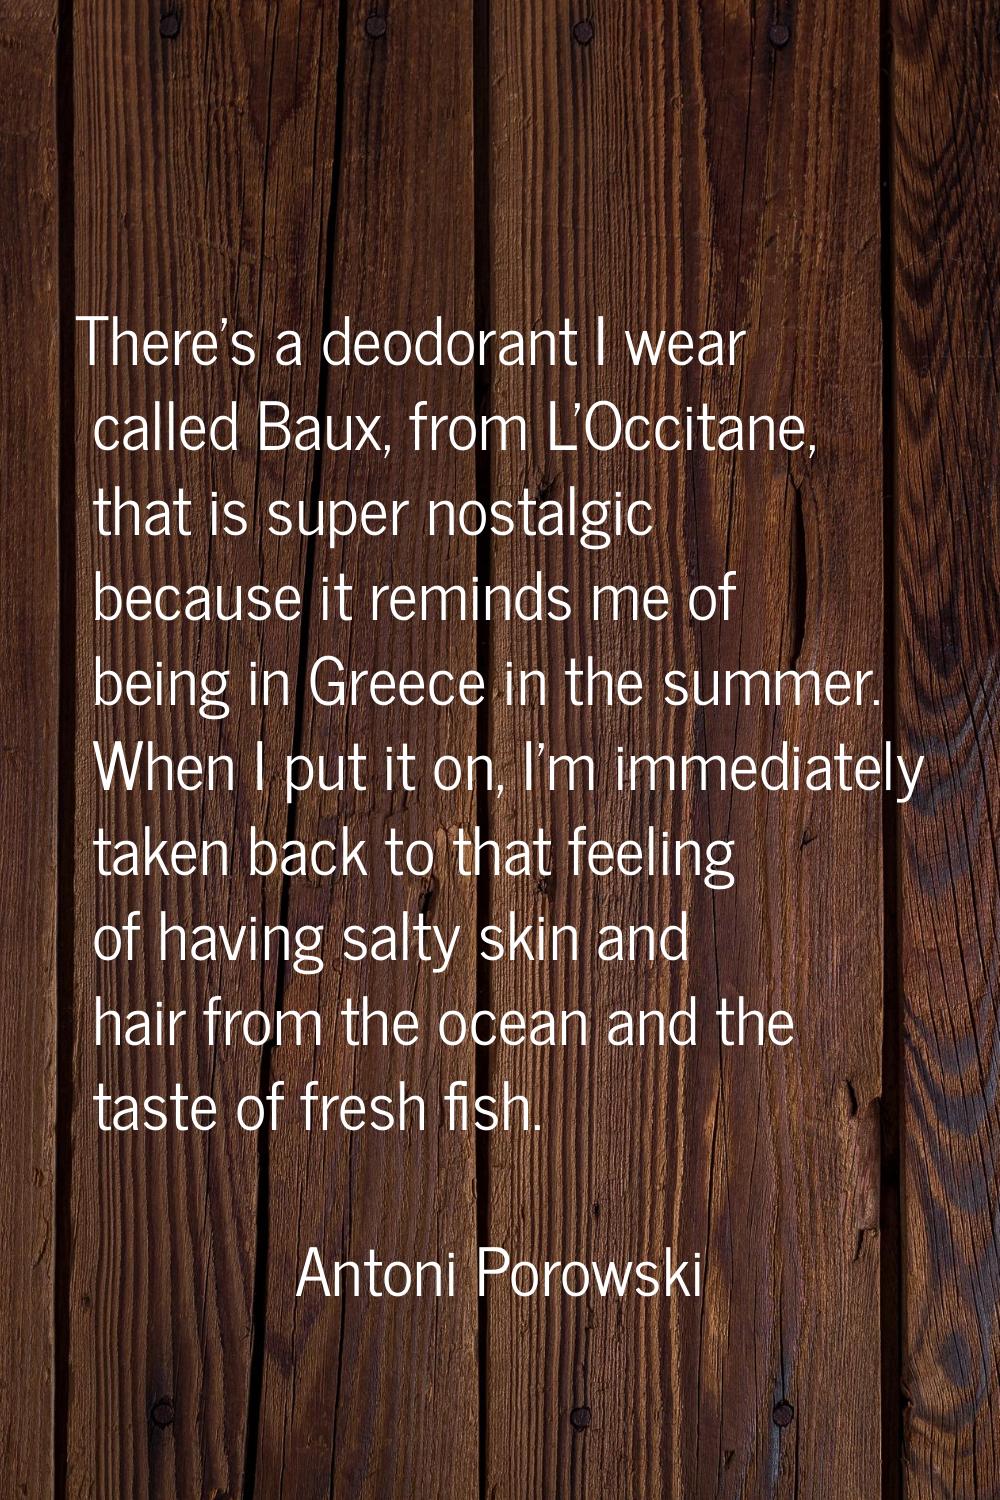 There's a deodorant I wear called Baux, from L'Occitane, that is super nostalgic because it reminds